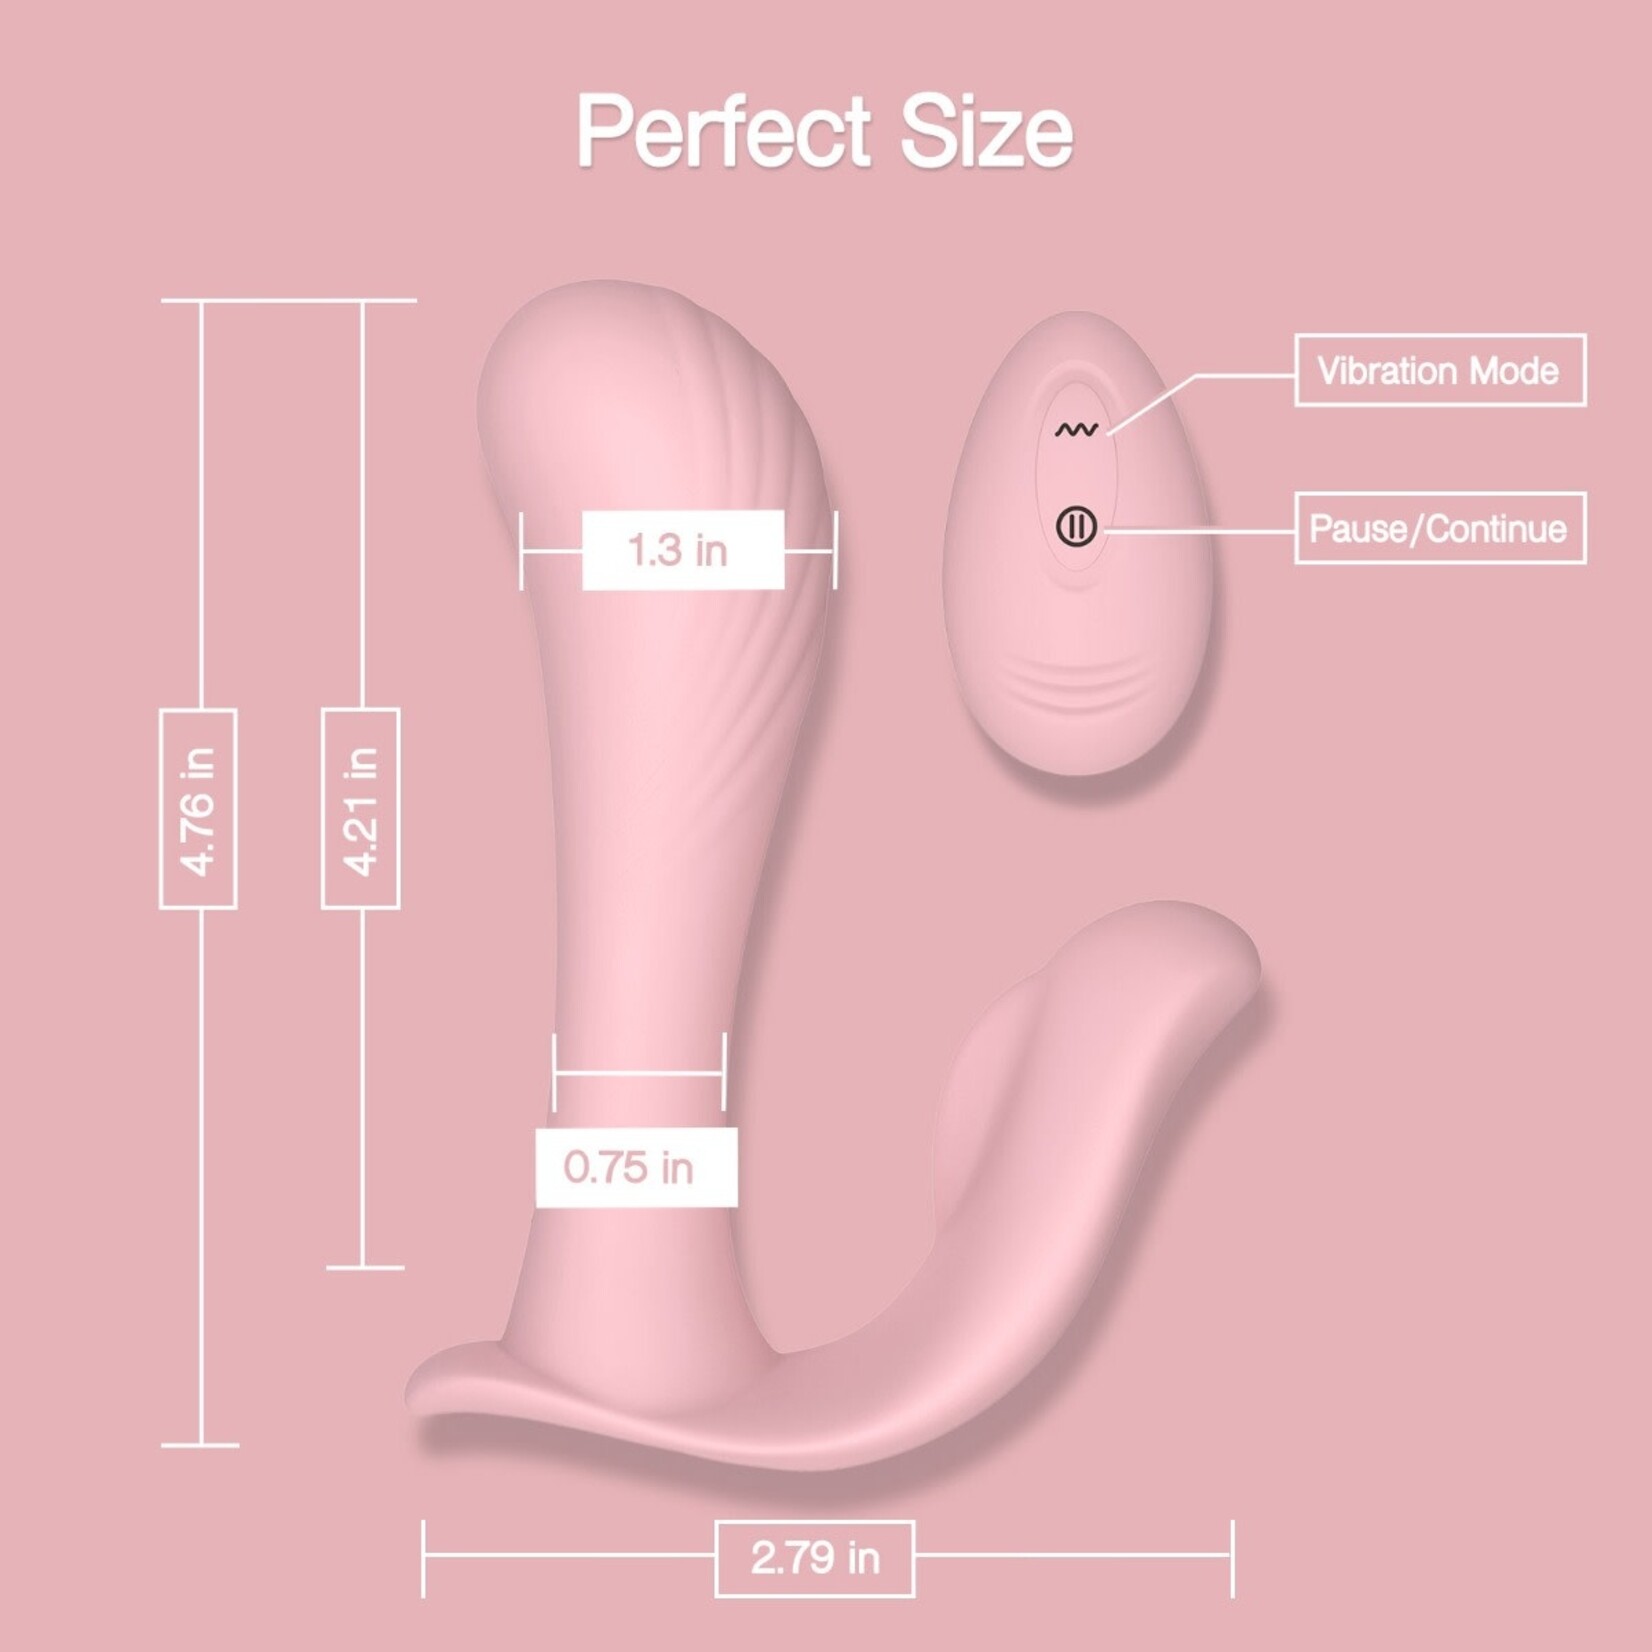 TRACY'S DOG TRACY'S DOG - WEARABLE PANTY VIBRATOR WITH WIRELESS PINK